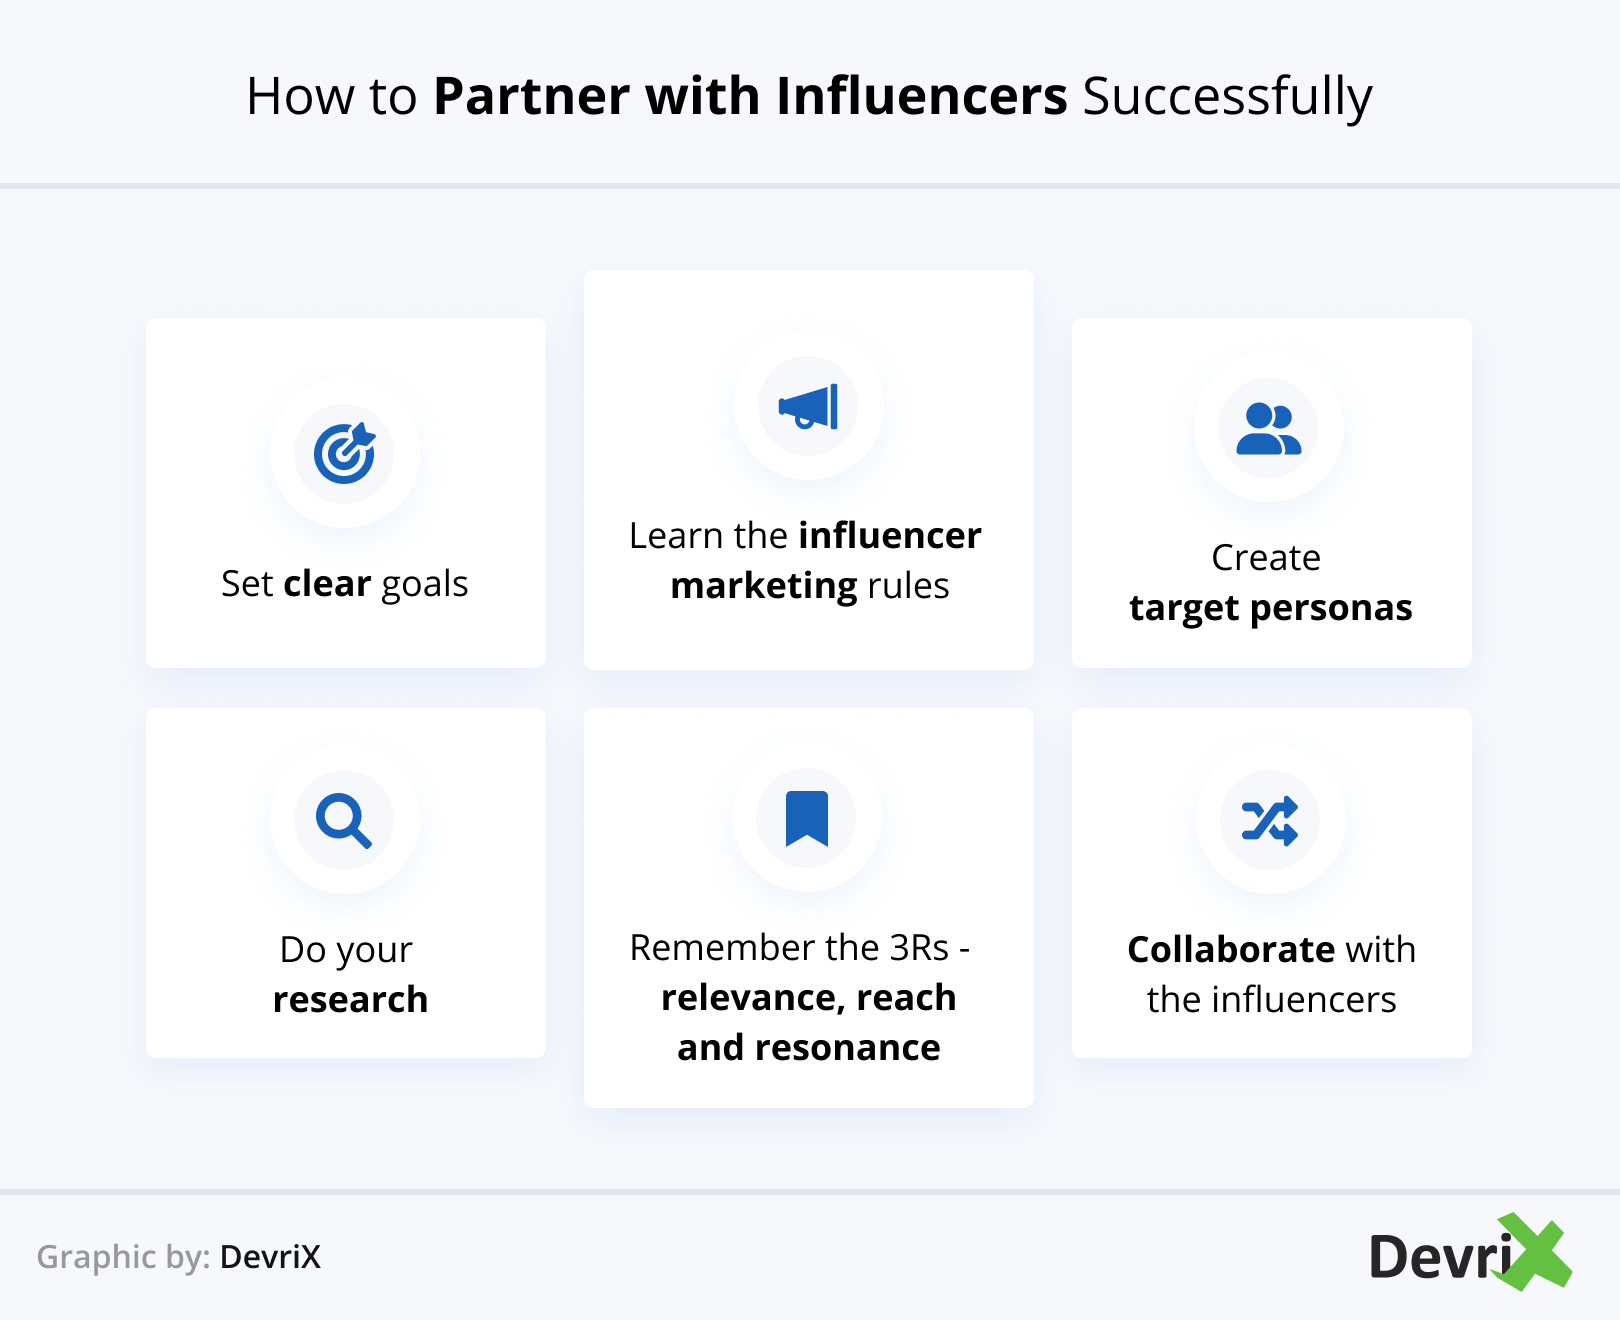 How to Partner with Influencers Successfully